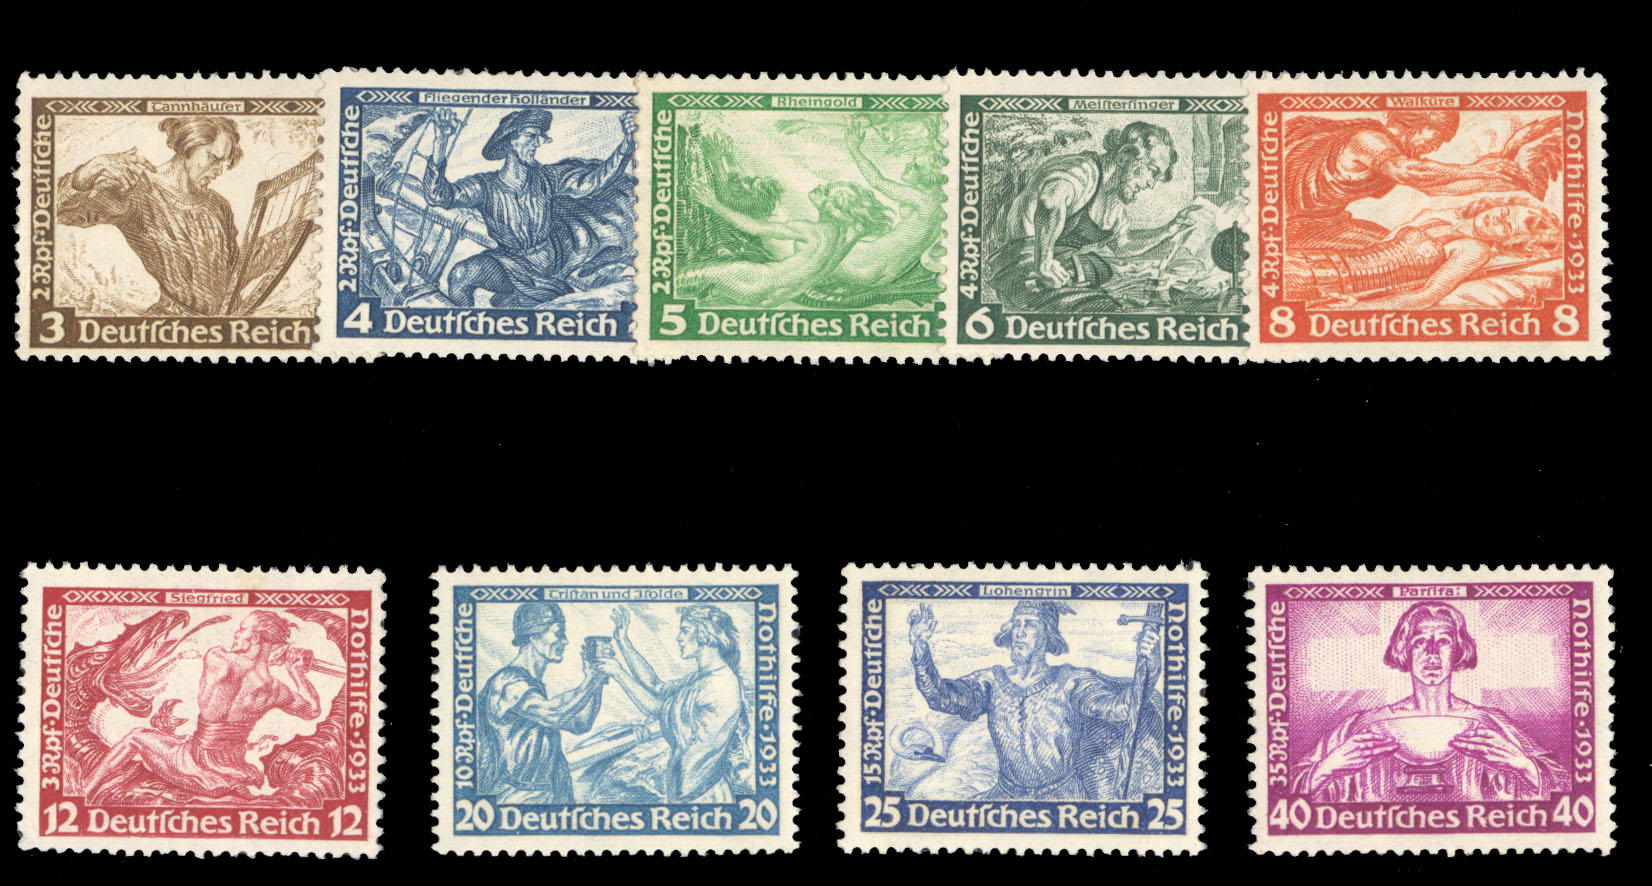 Lot 547 - GERMAN COLONIES German Offices in the Turkish Empire  -  Cherrystone Auctions U.S. & Worldwide Stamps & Postal History